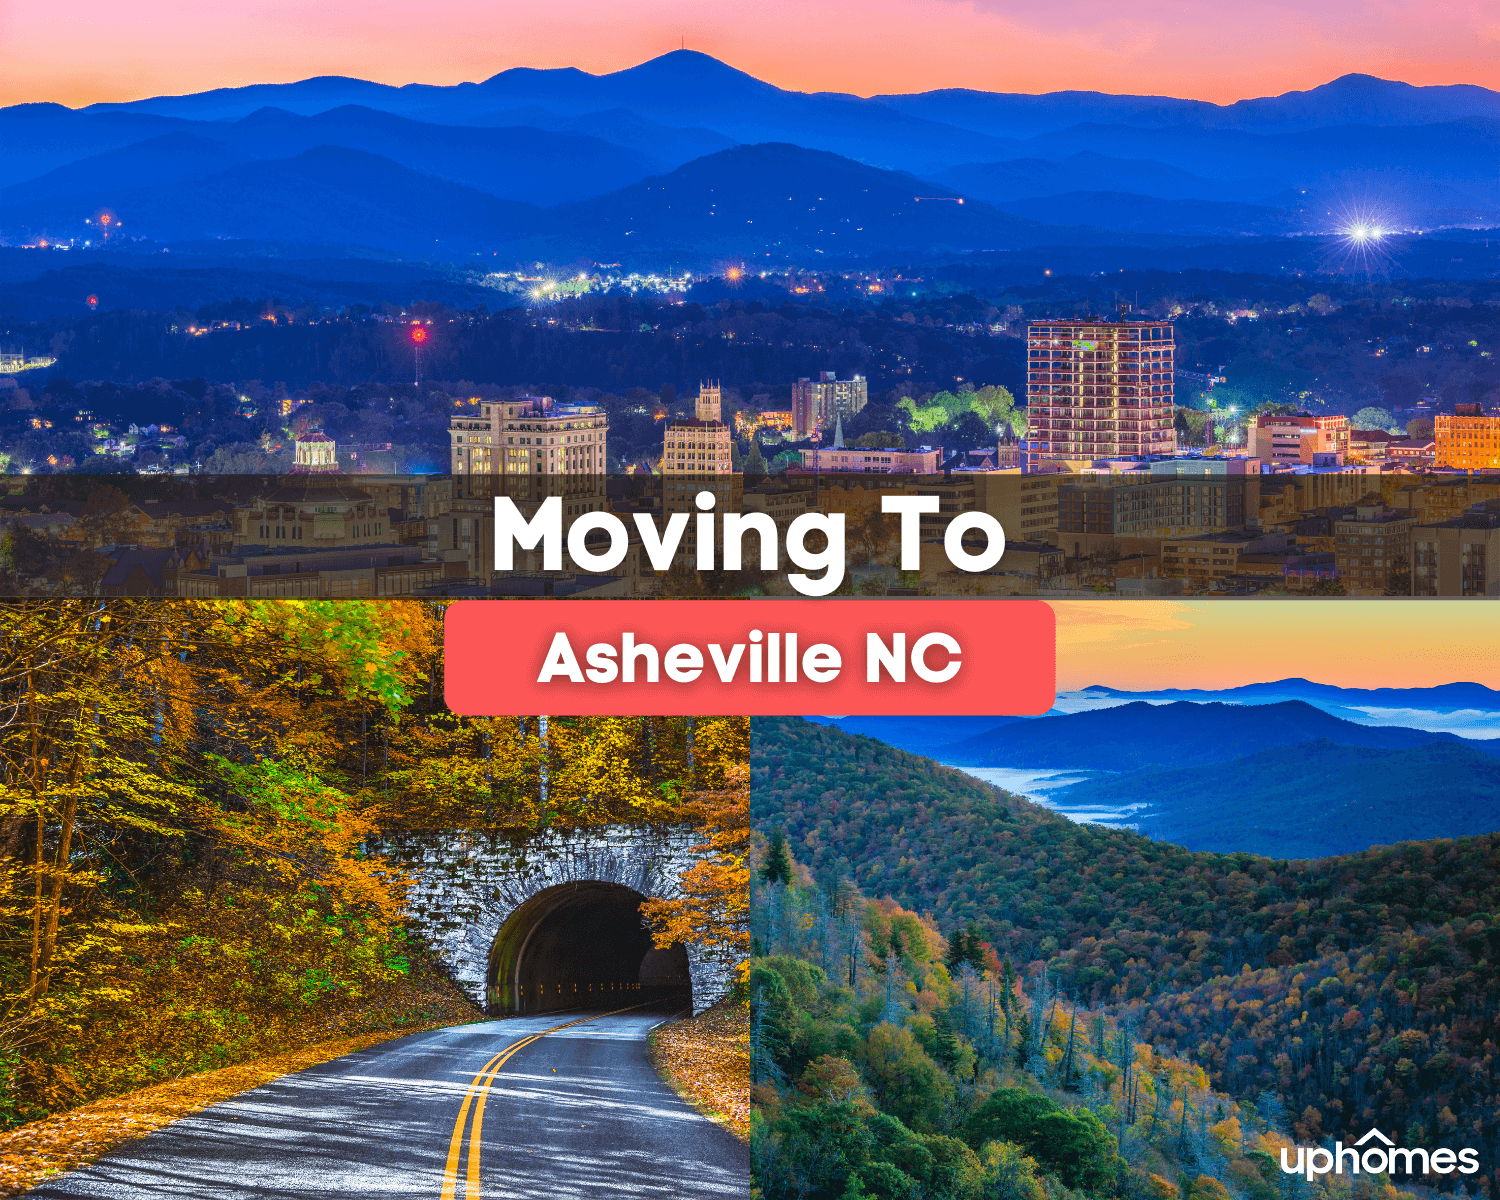 Moving to Asheville NC - What is it like living in Asheville?